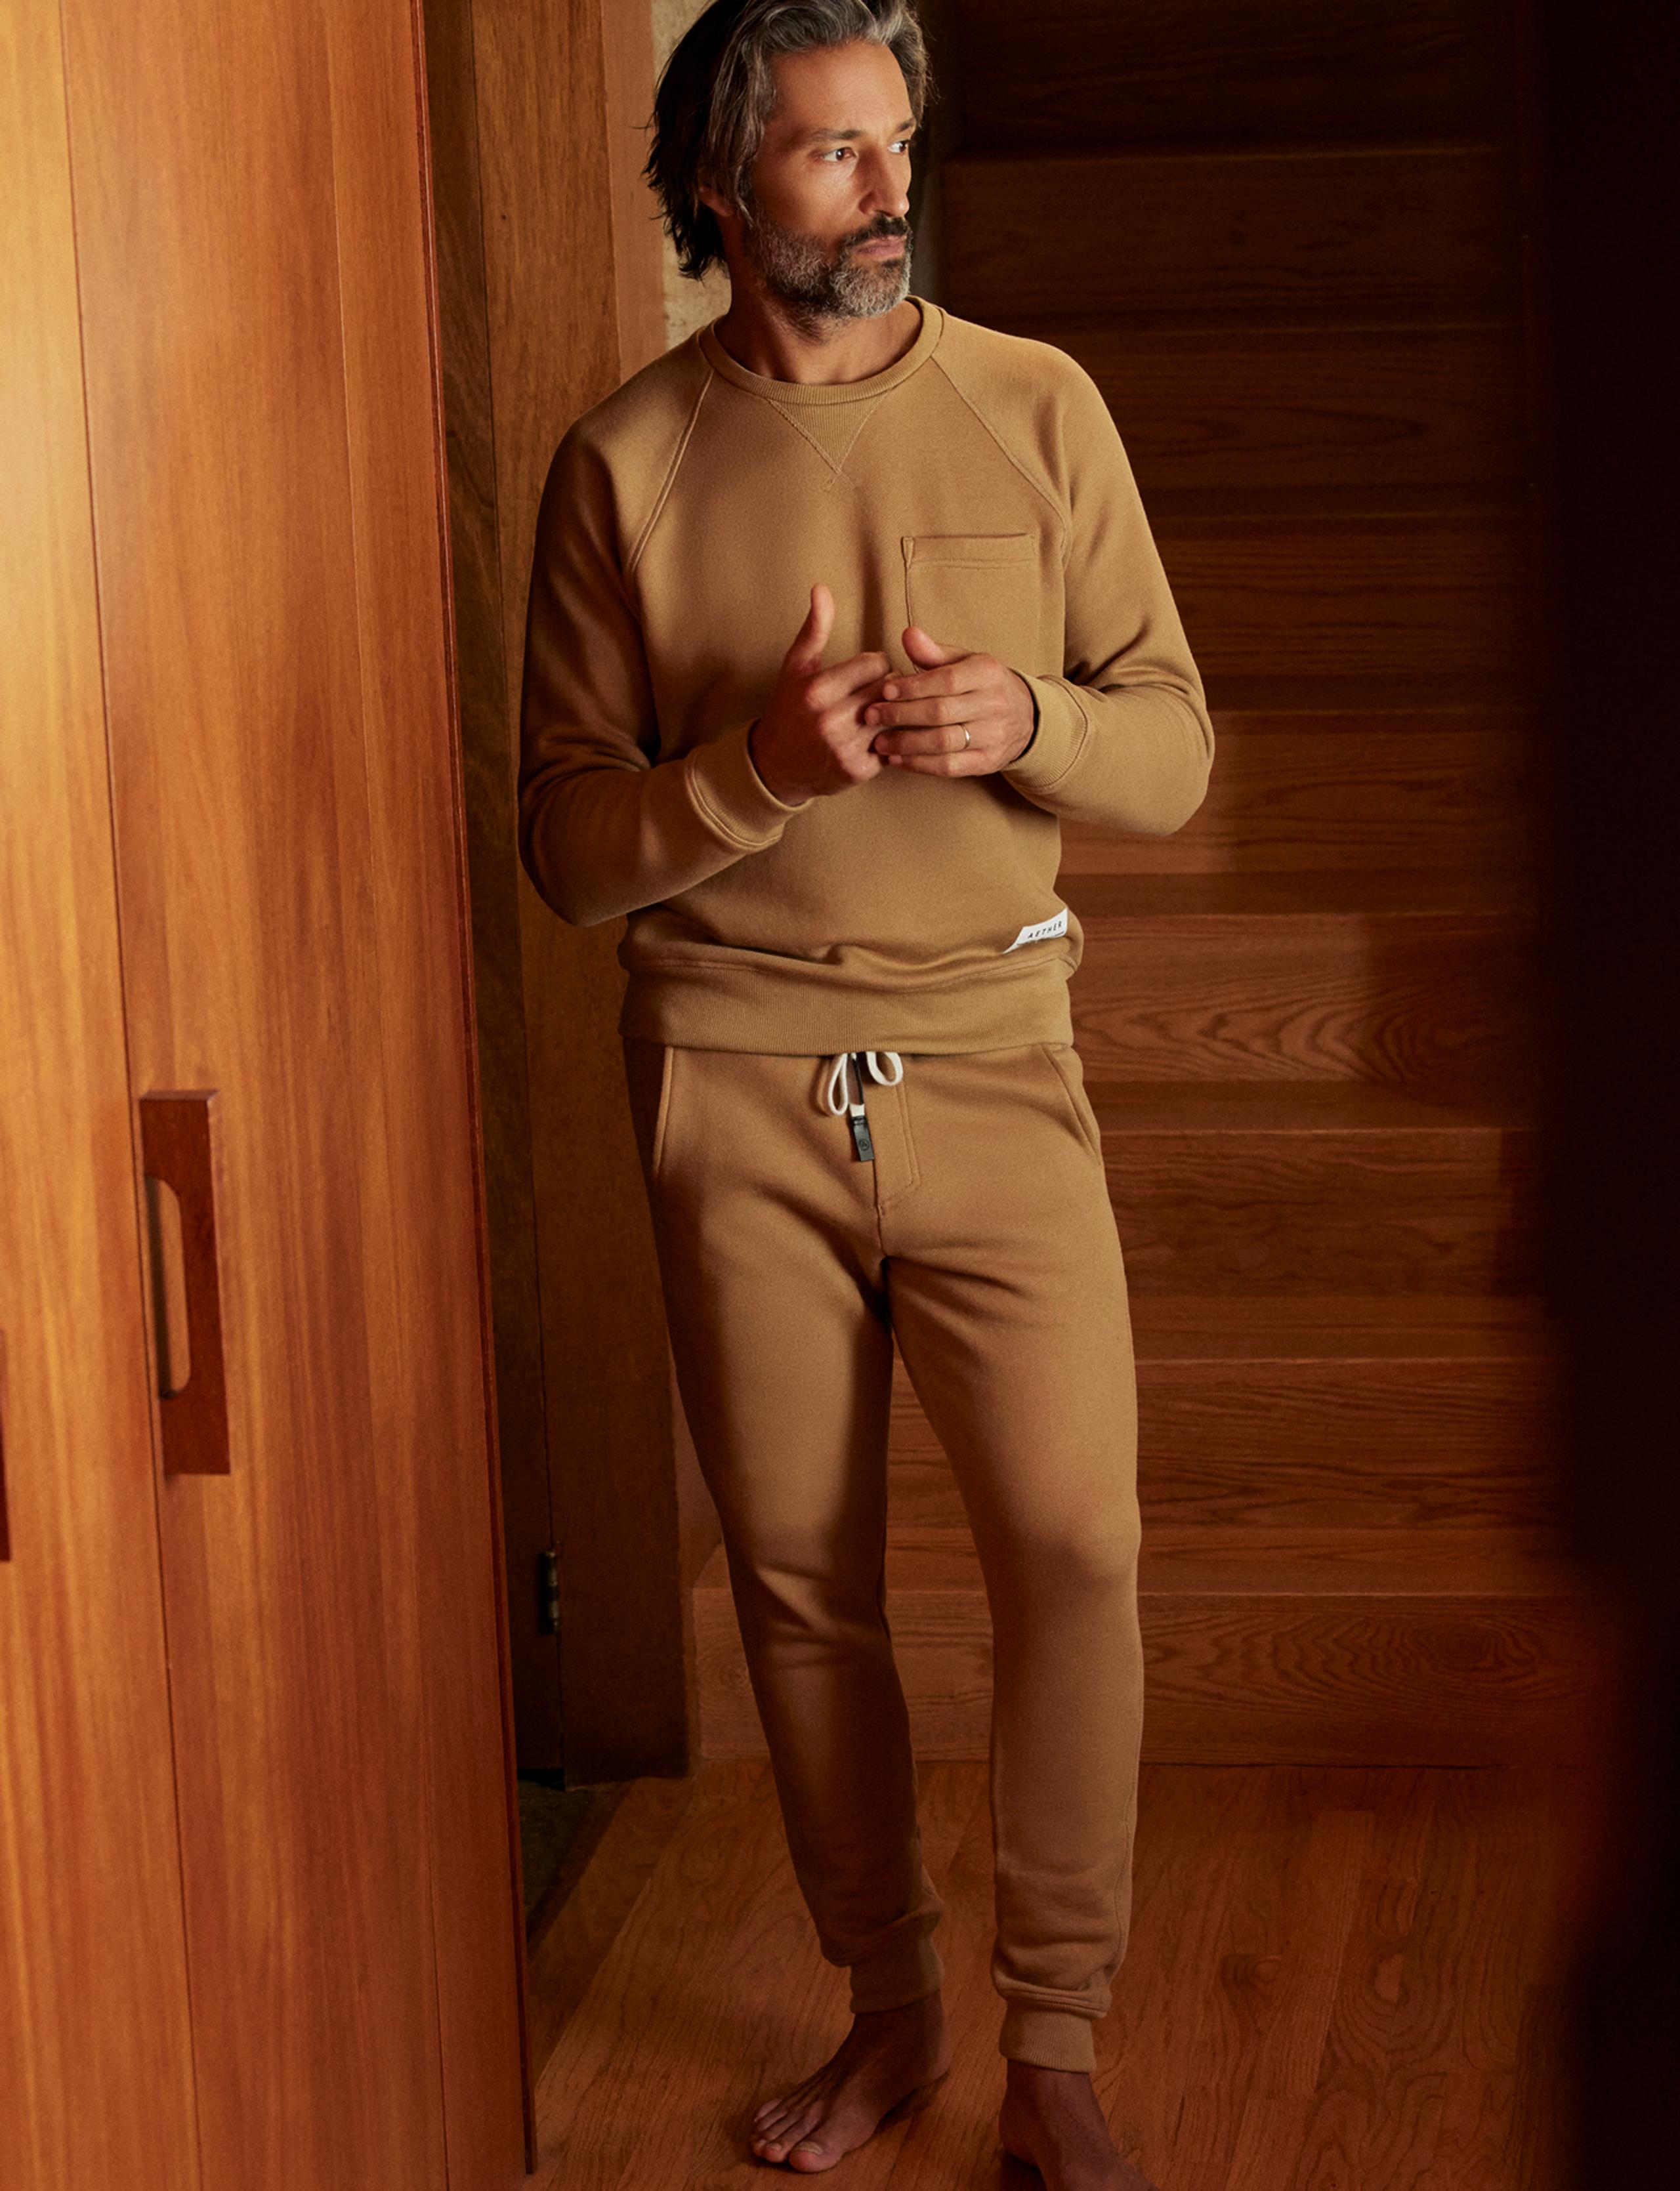 Man wearing Foundation Pocket Crew and Sweatpant standing inside mid-century home